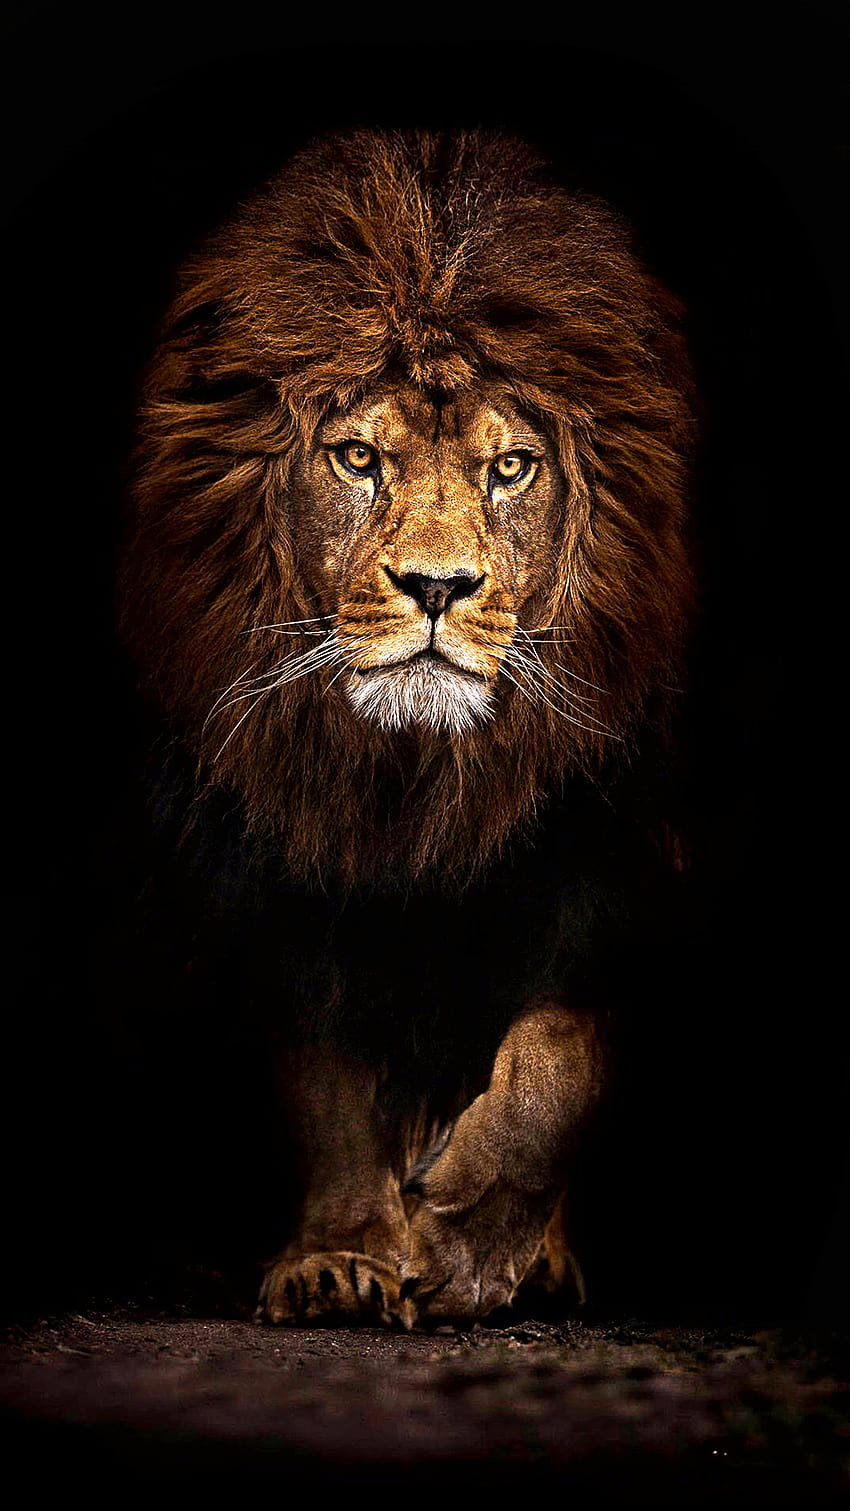 30 Motivational Lion Quotes In Pictures - Courage & Strength